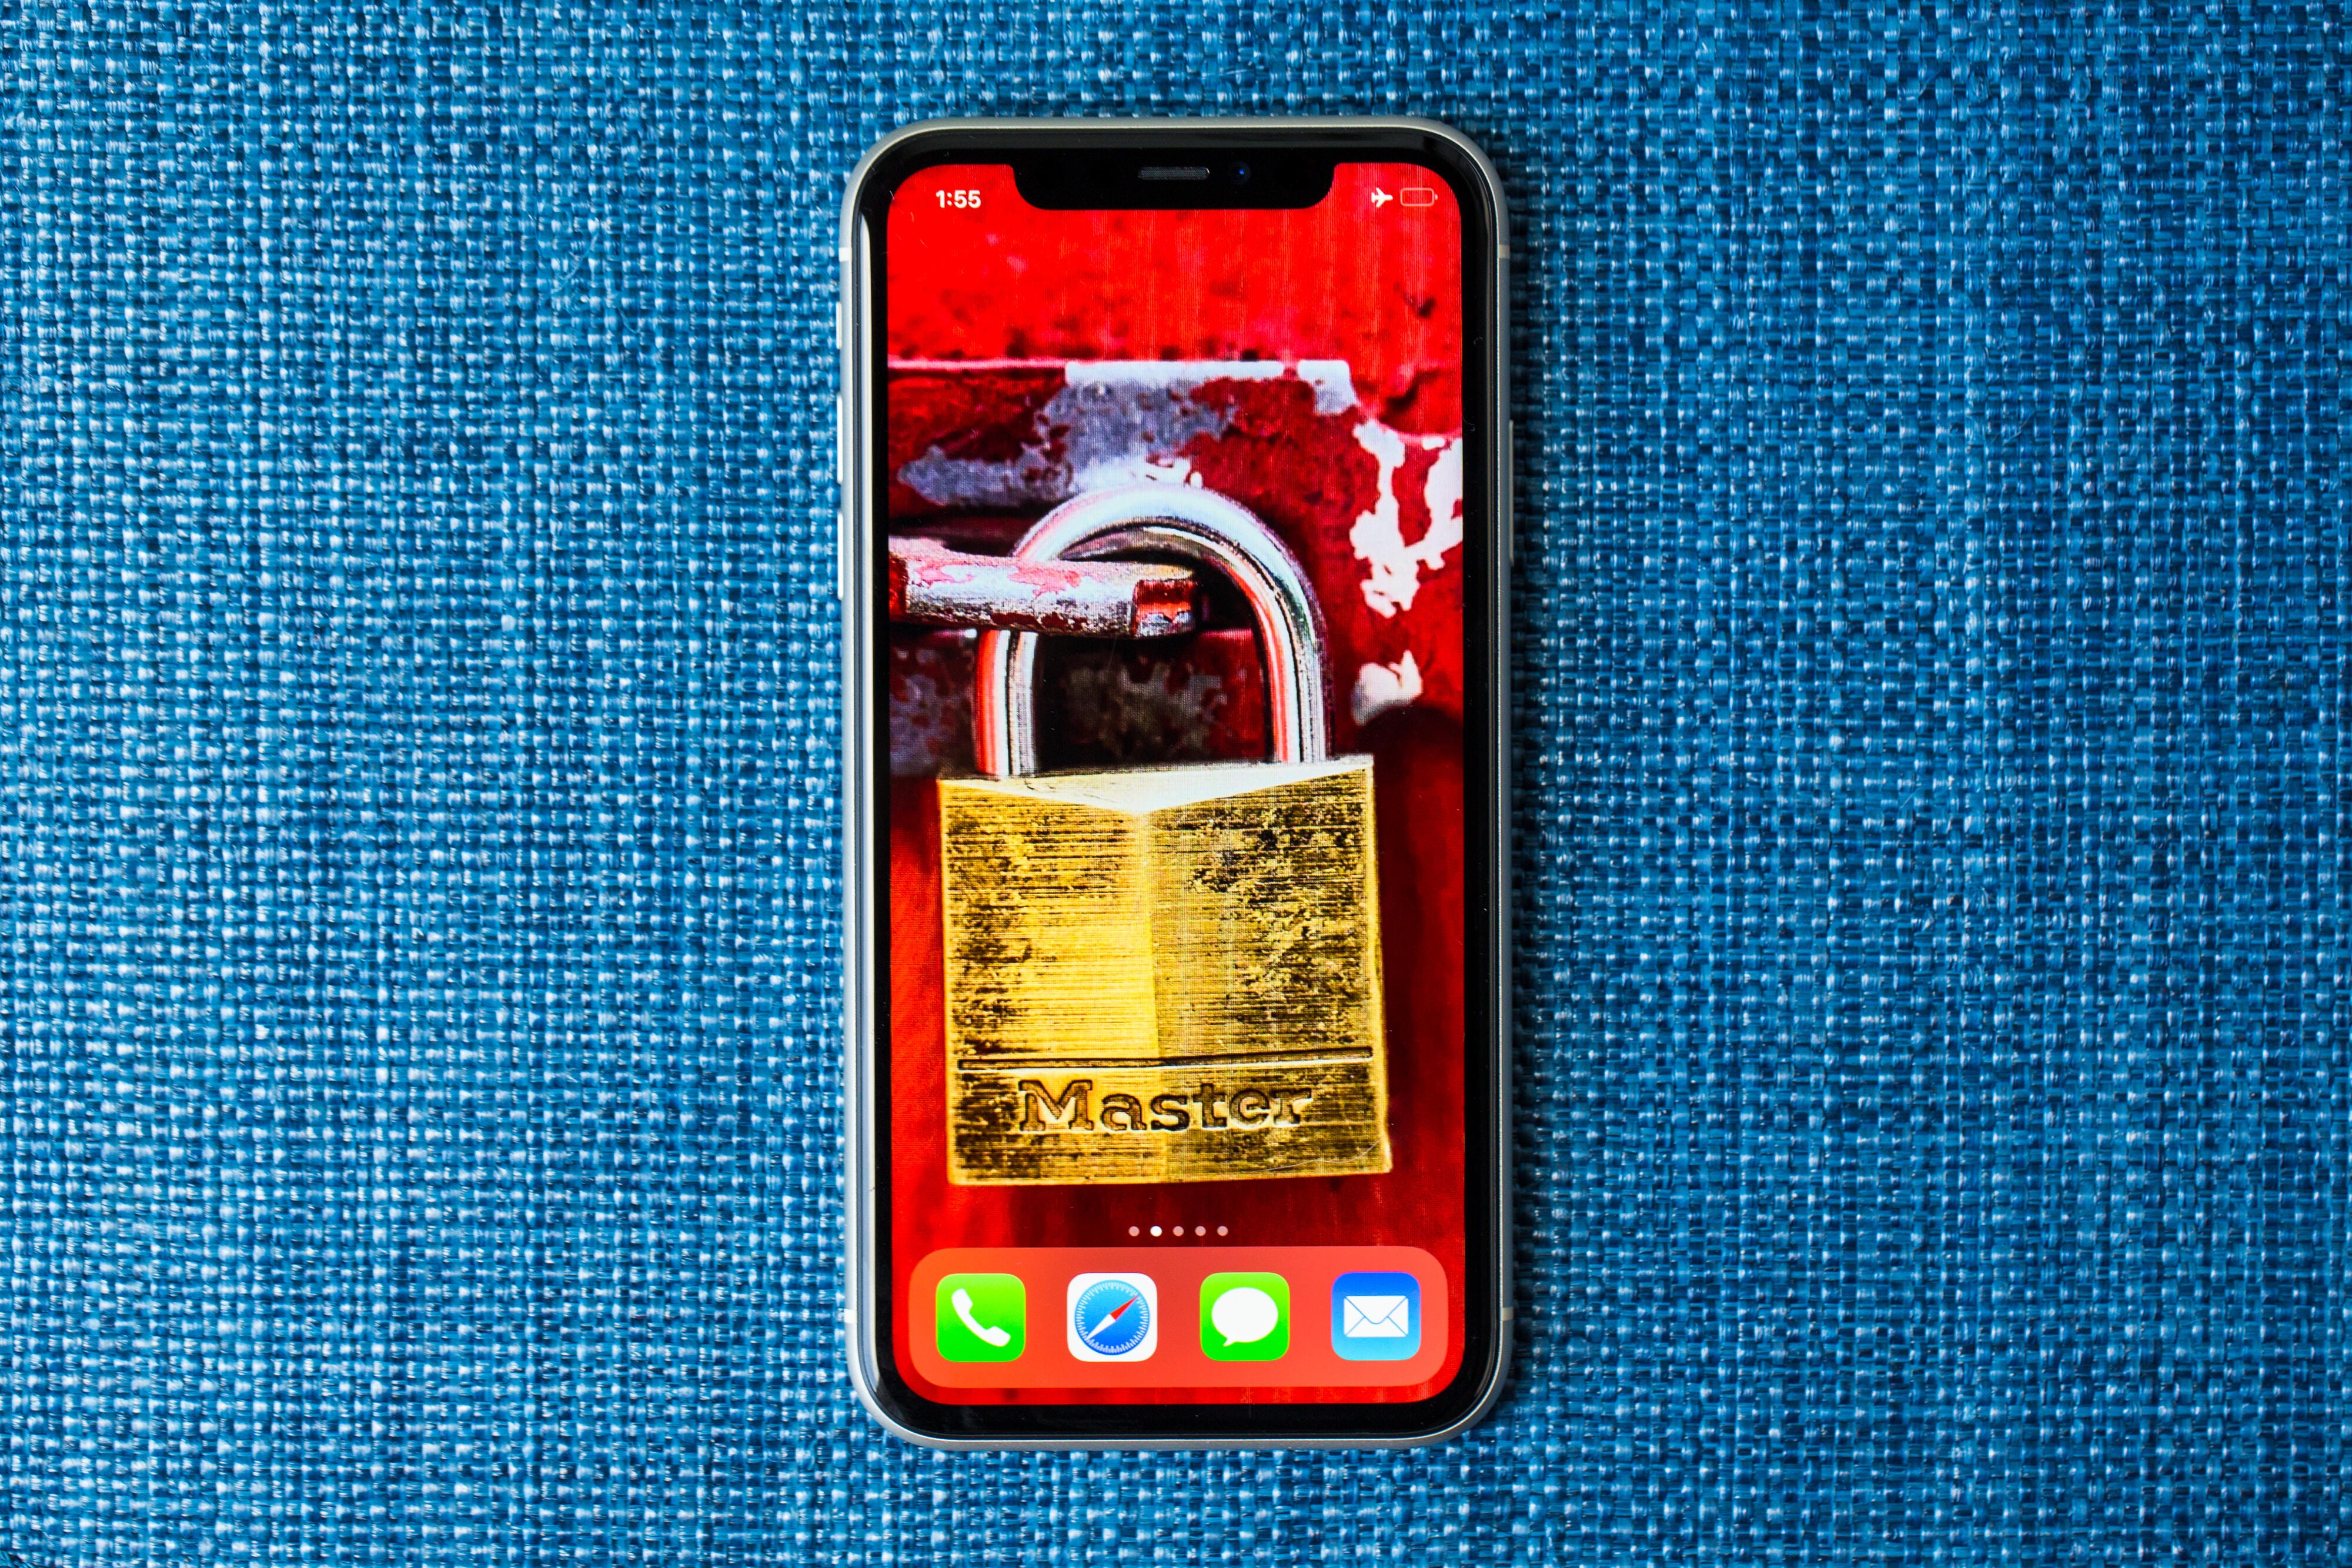 iOS 14 just made your iPhone more private and secure: 3 things that changed